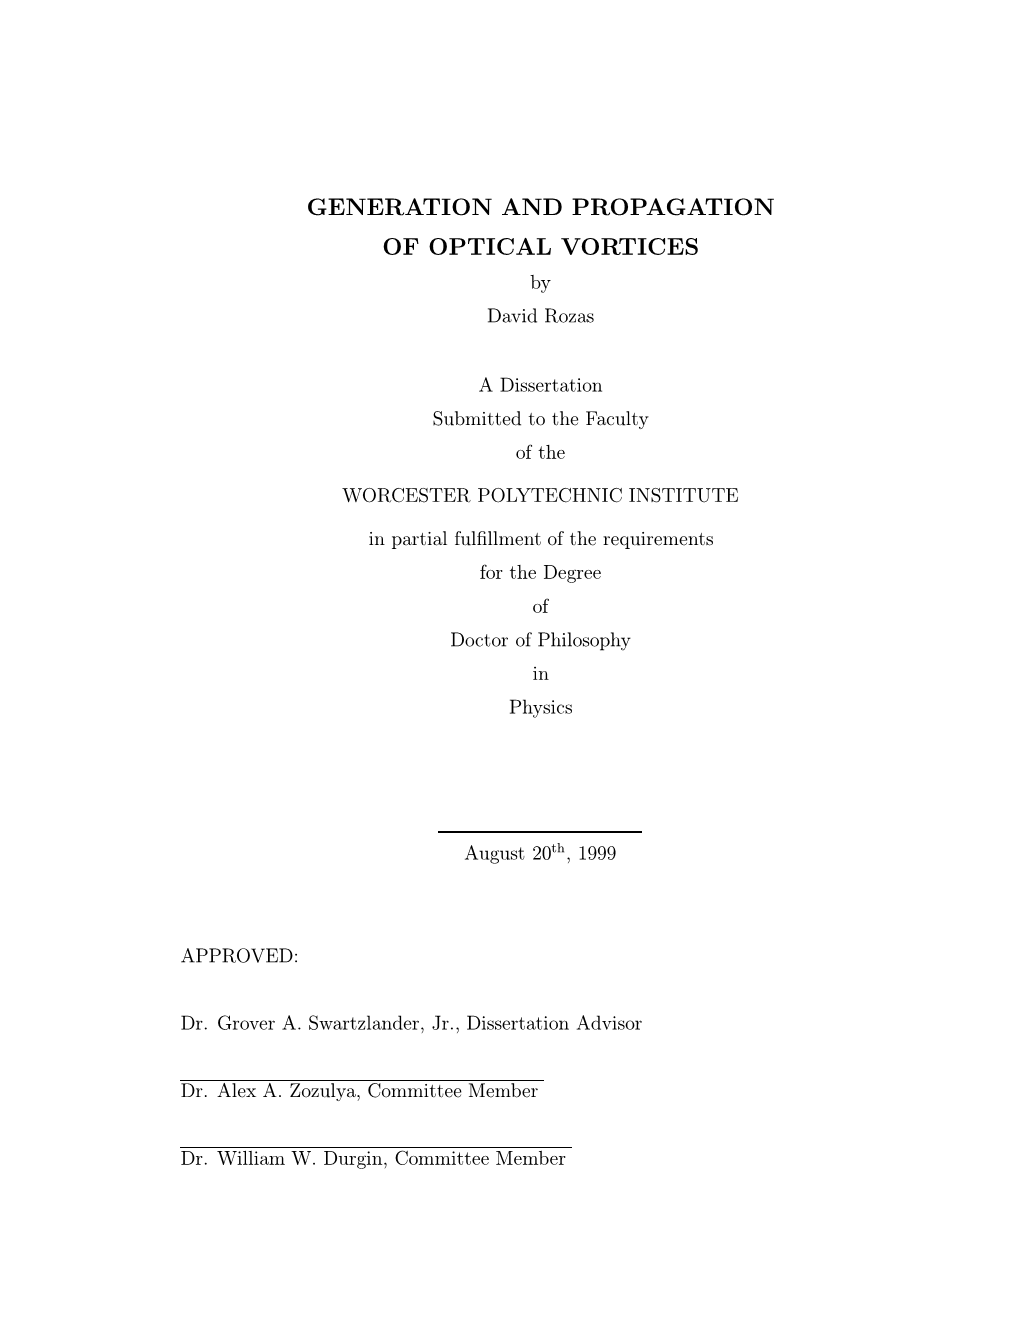 GENERATION and PROPAGATION of OPTICAL VORTICES by David Rozas